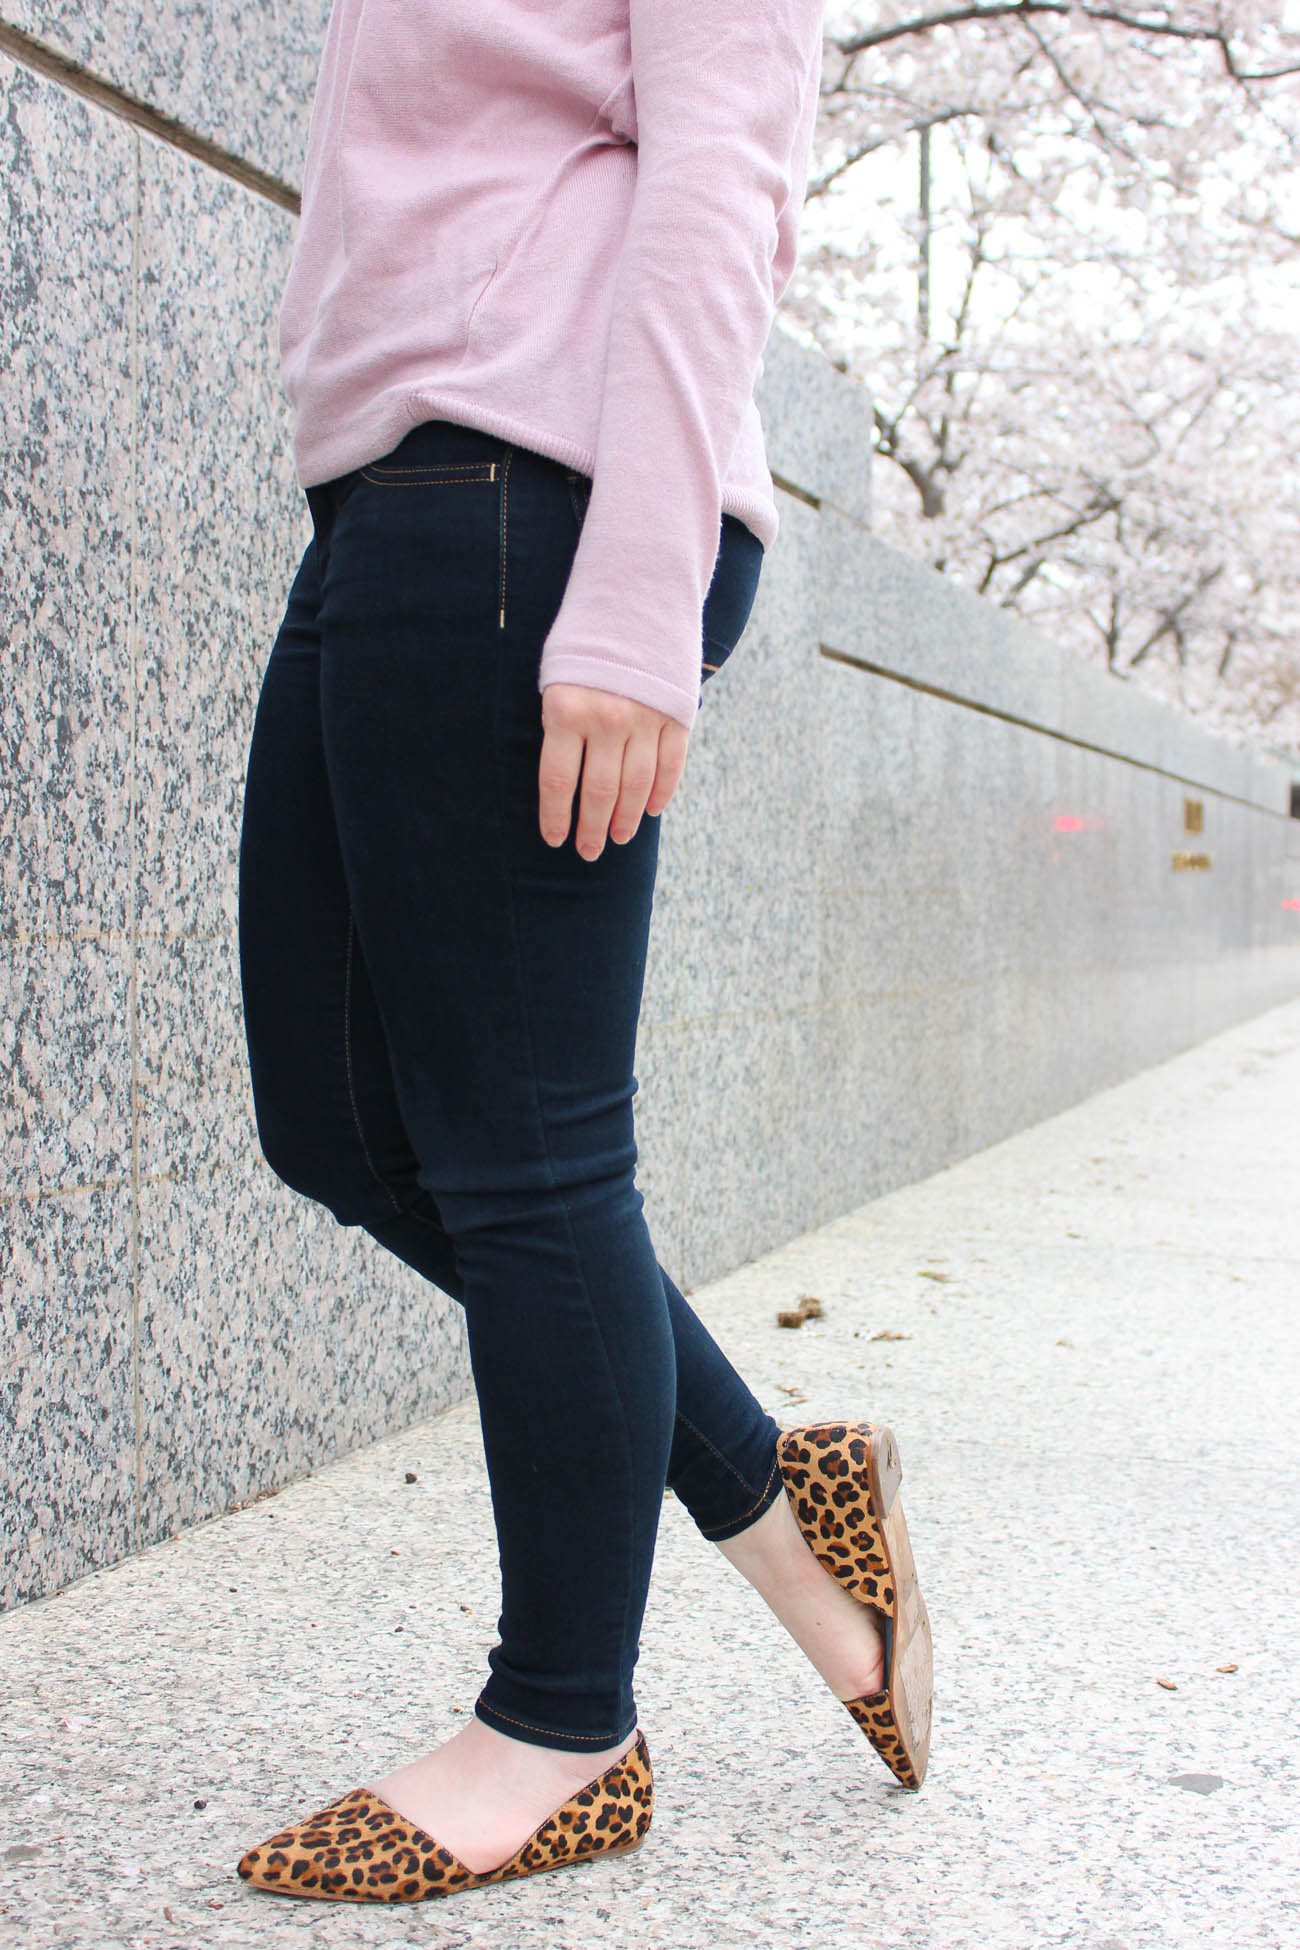 The Cherry Blossoms Outfit | Something Good, @danaerinw, american eagle outfitters, aeo, skinny jeans, jeggings, d'orsay flats, leopard print, j.crew factory shoes